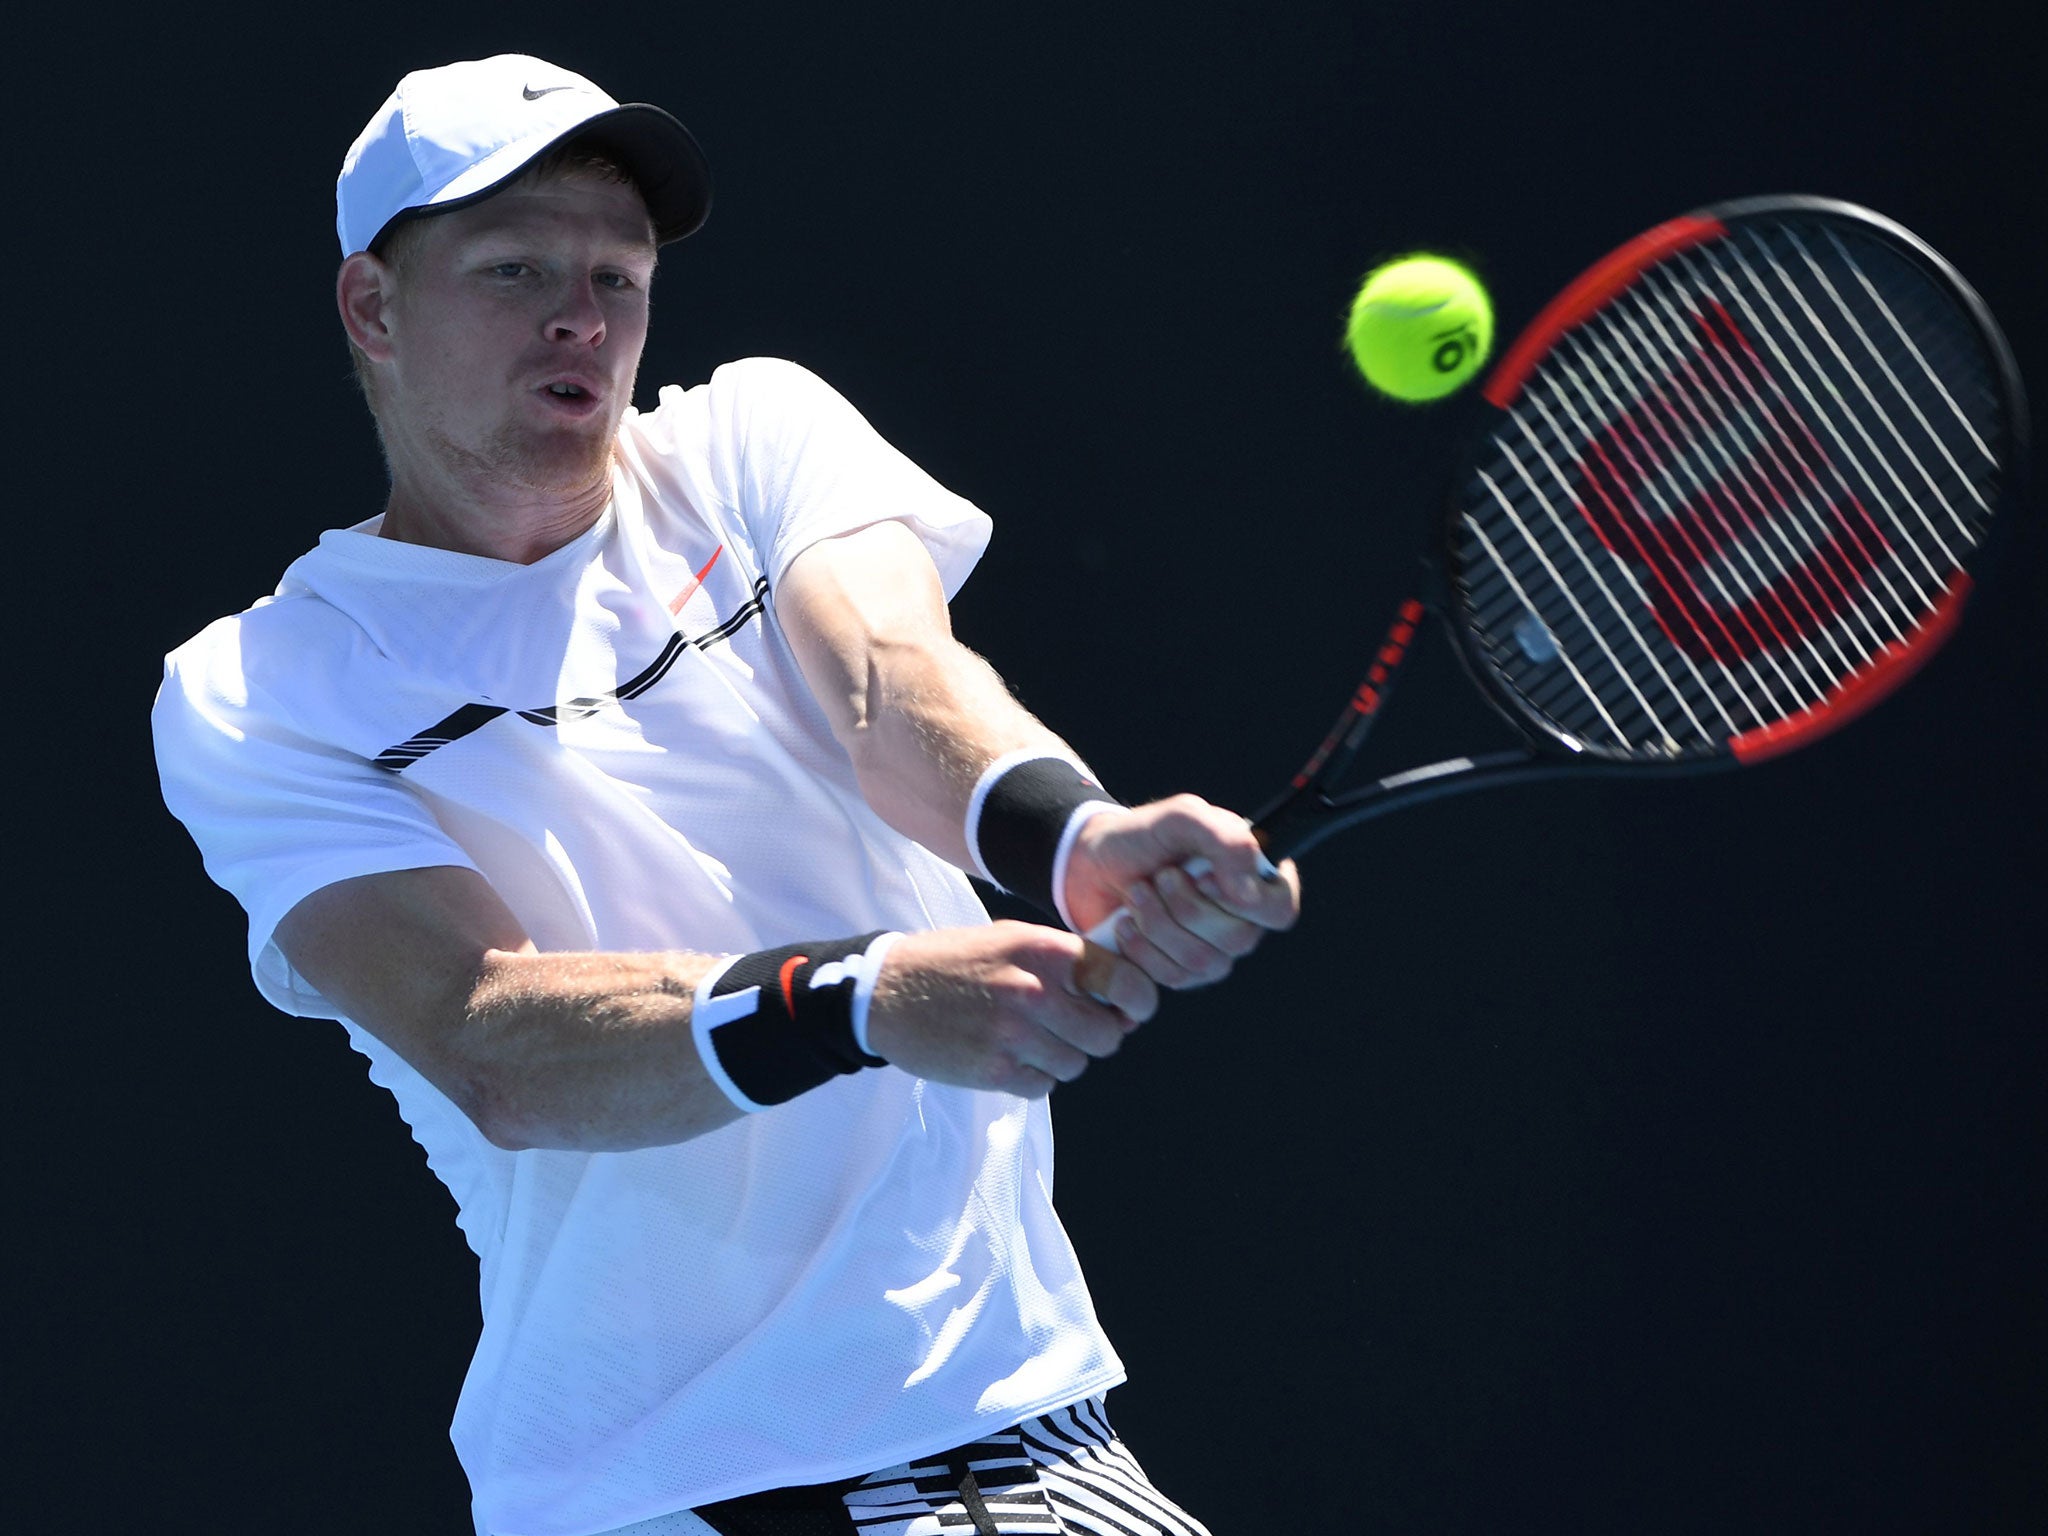 Kyle Edmund saw his hopes of victory in Florida end at the hands of Milos Raonic